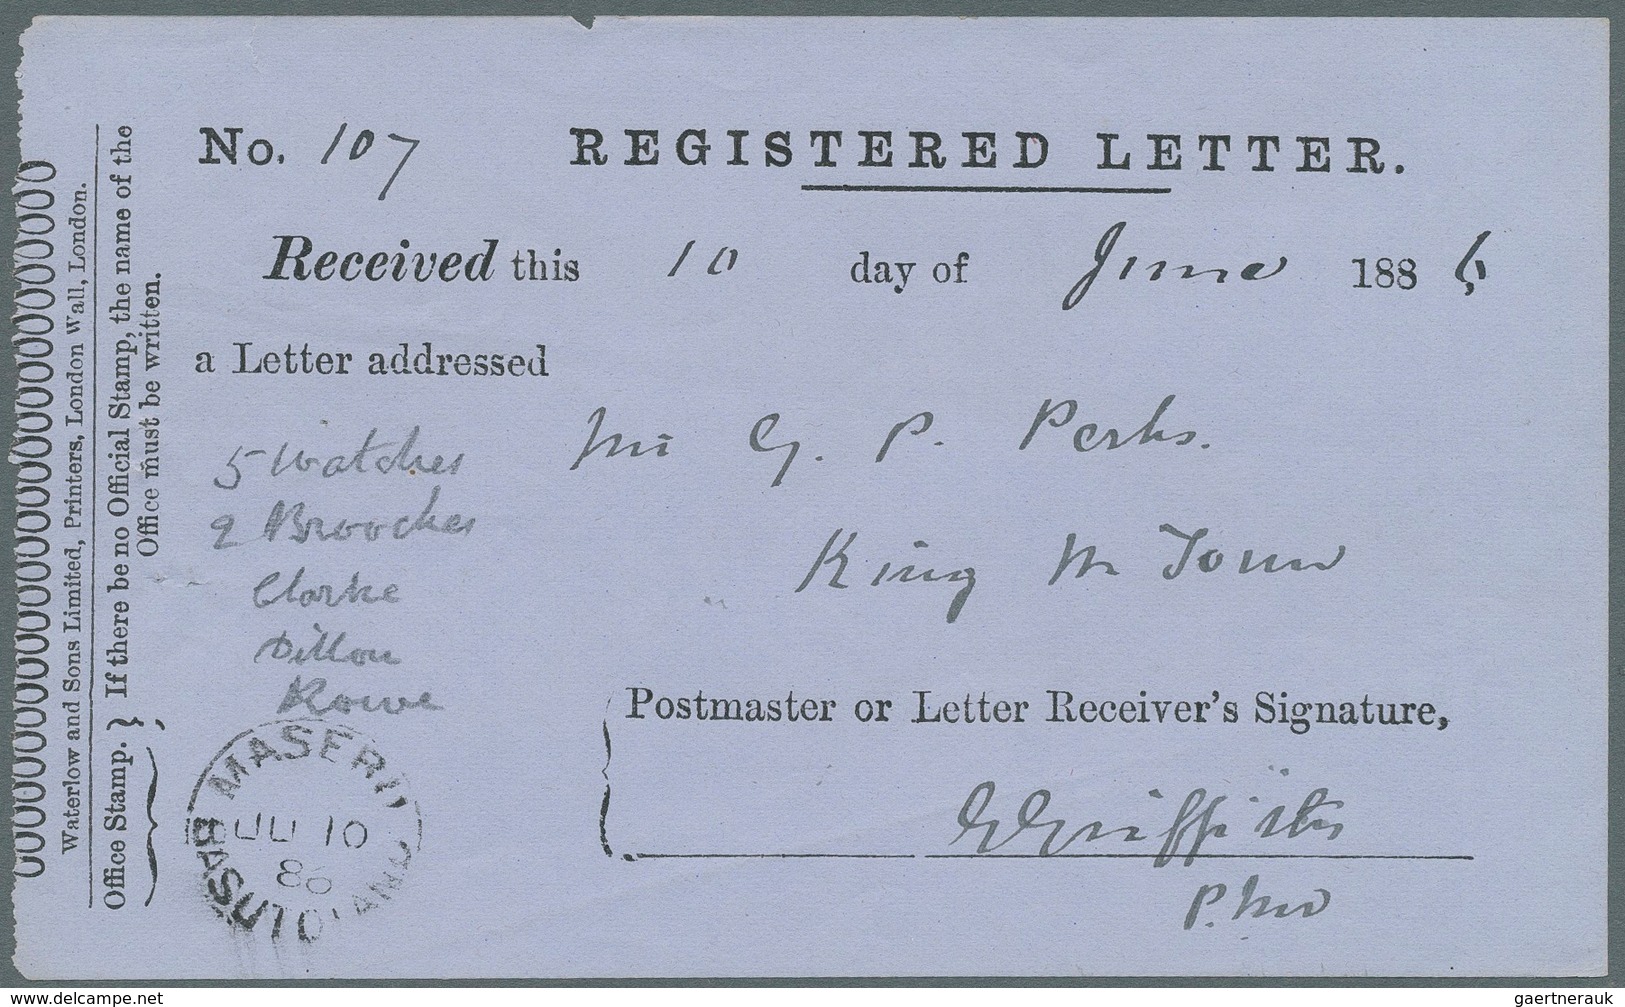 Basutoland: 1886/1887, five 'Registered Letter Receipts' all cancelled with fine MASERU/BASUTOLAND c